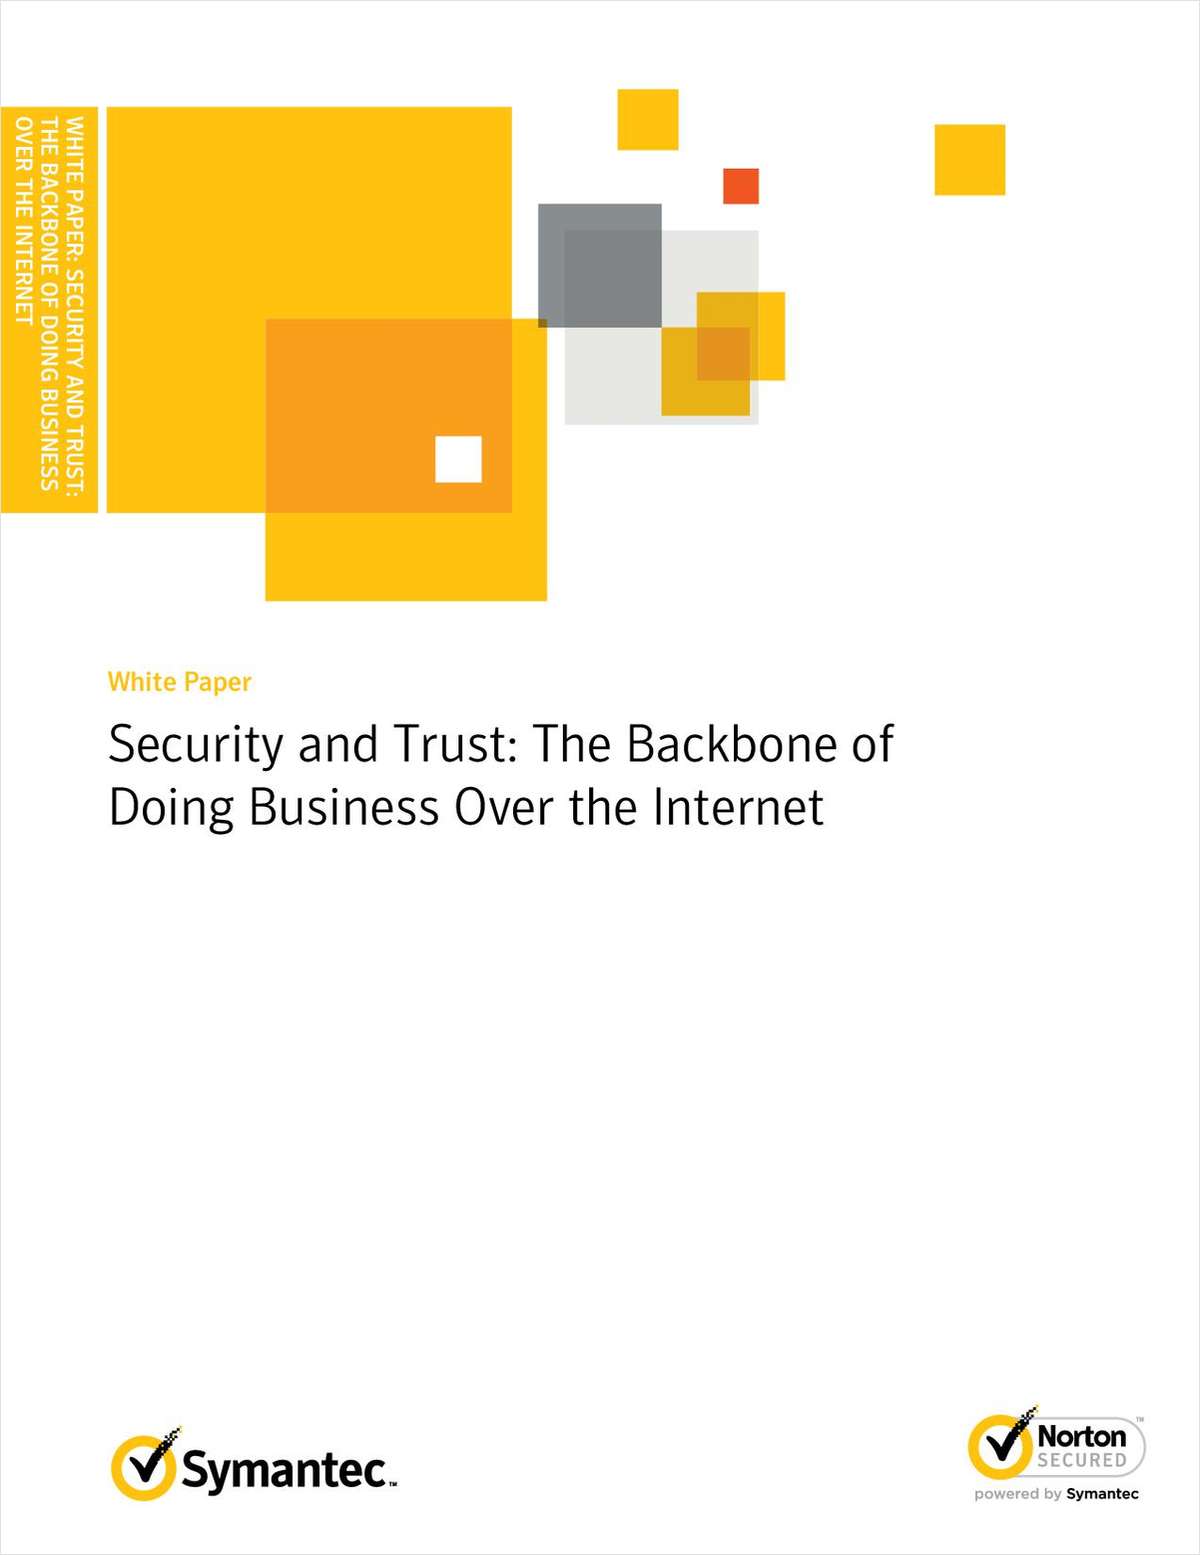 Security and Trust: The Backbone of Doing Business Over the Internet